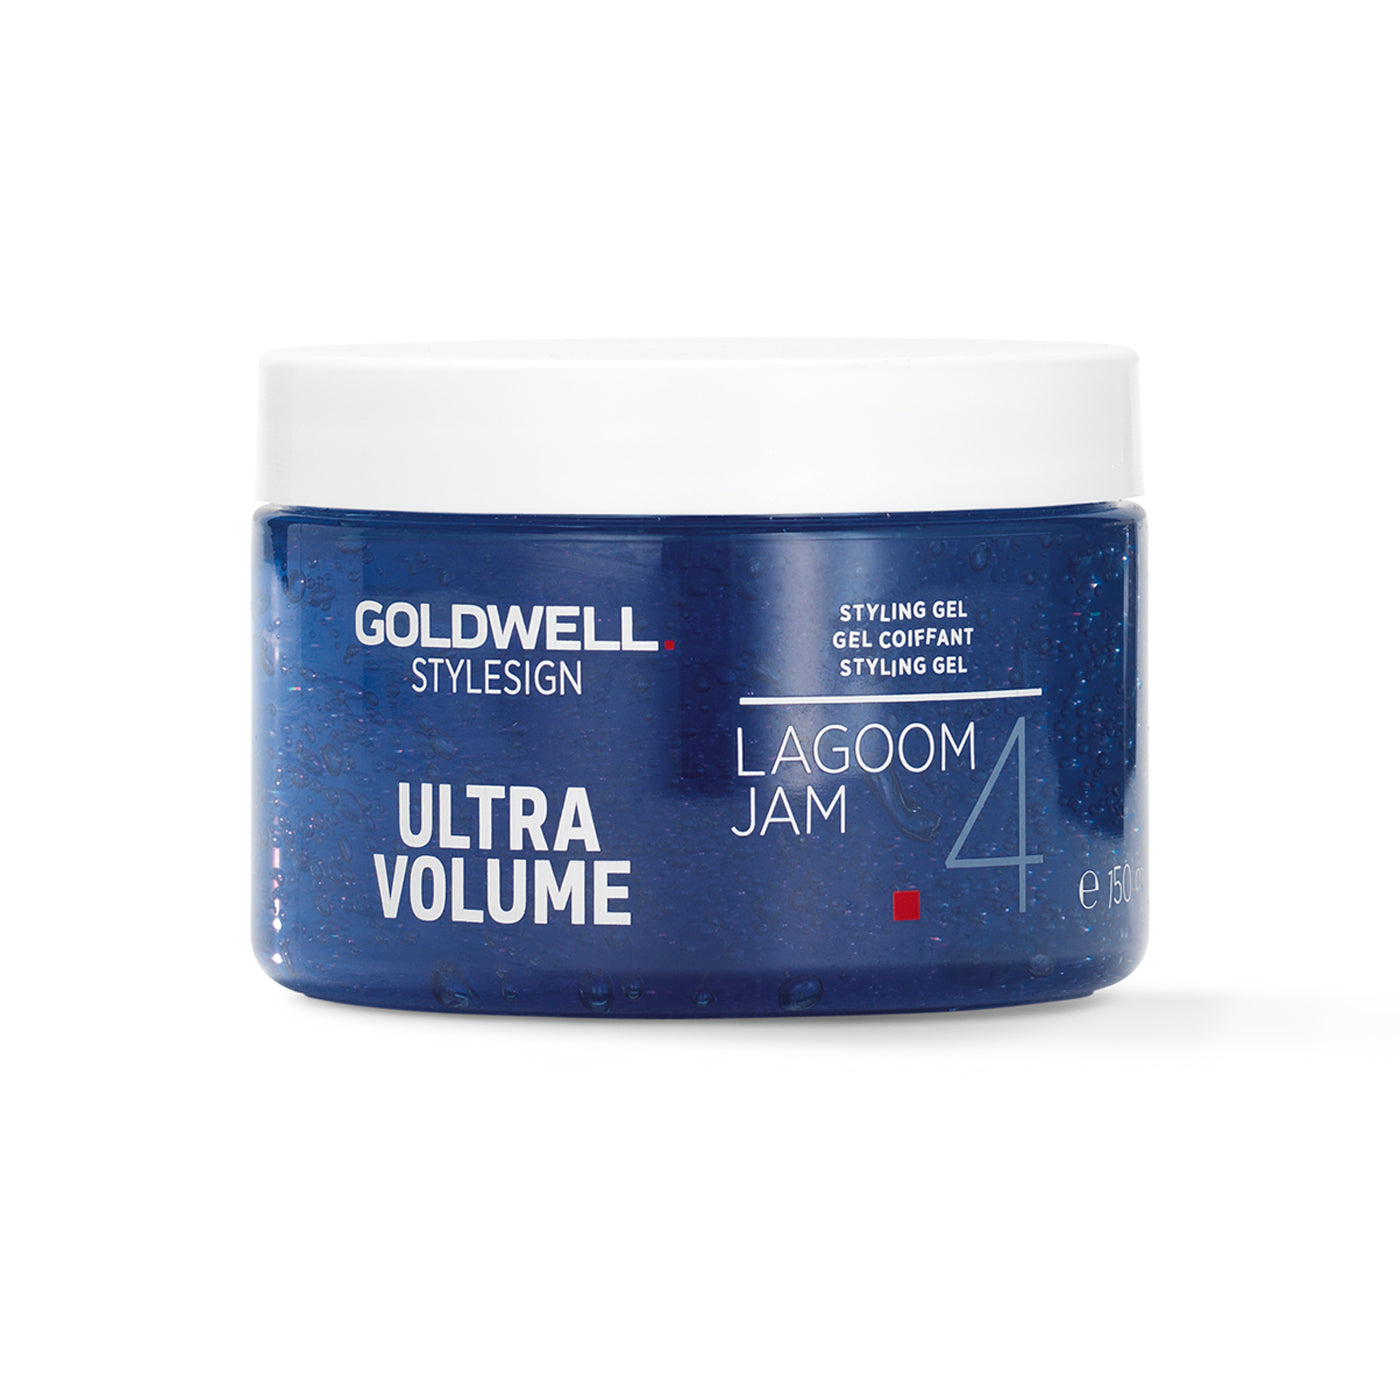 Goldwell Style Sign Lagoom Jam (150ml) - Ultimate Hair and Beauty